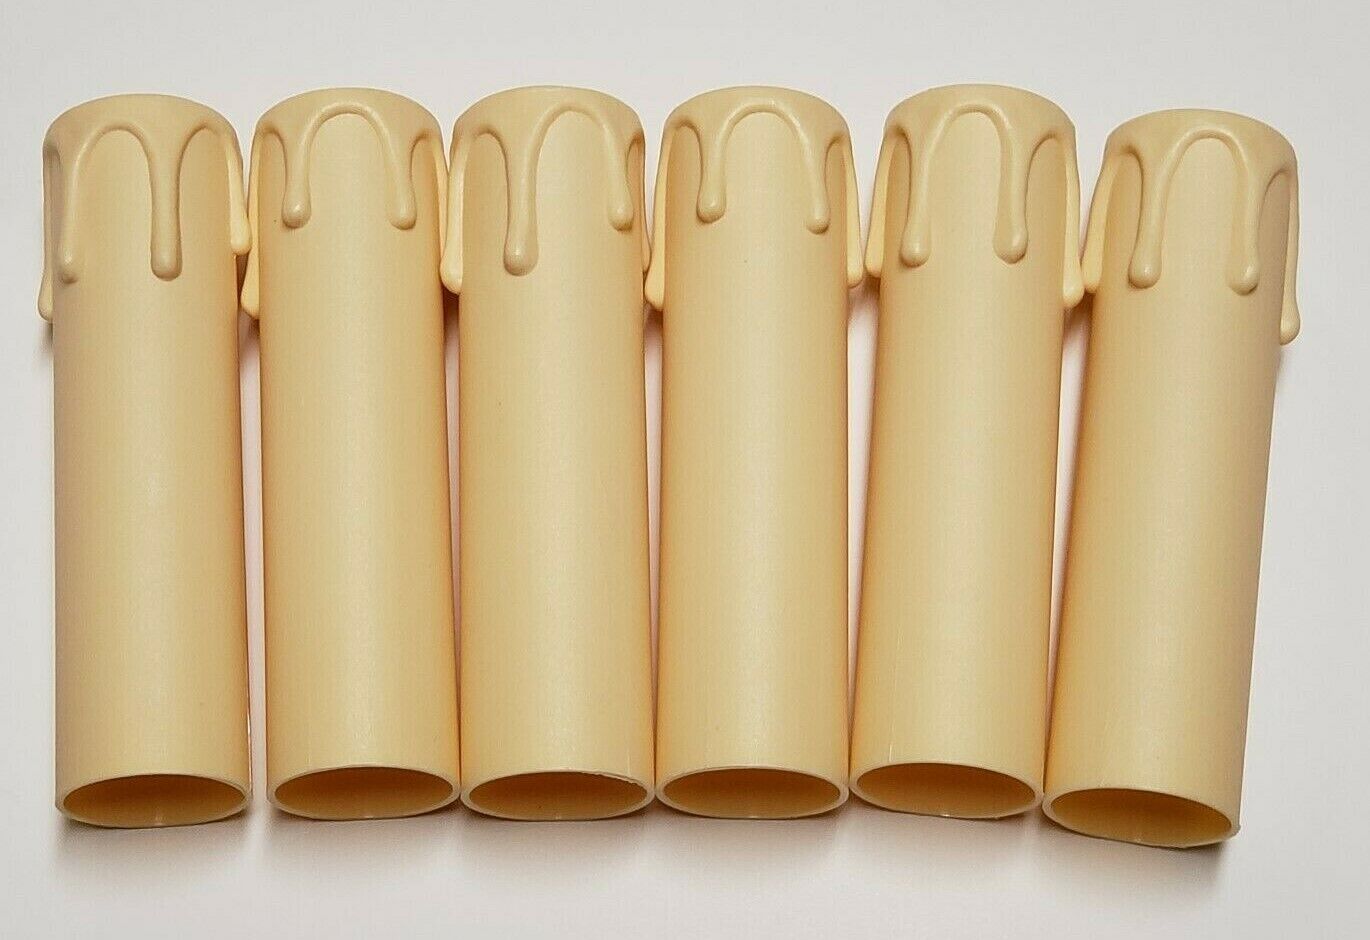 SET OF 6 - 100MM TALL IVORY PLASTIC EUROPEAN CANDLE COVERS WITH DRIPS 100IVG 